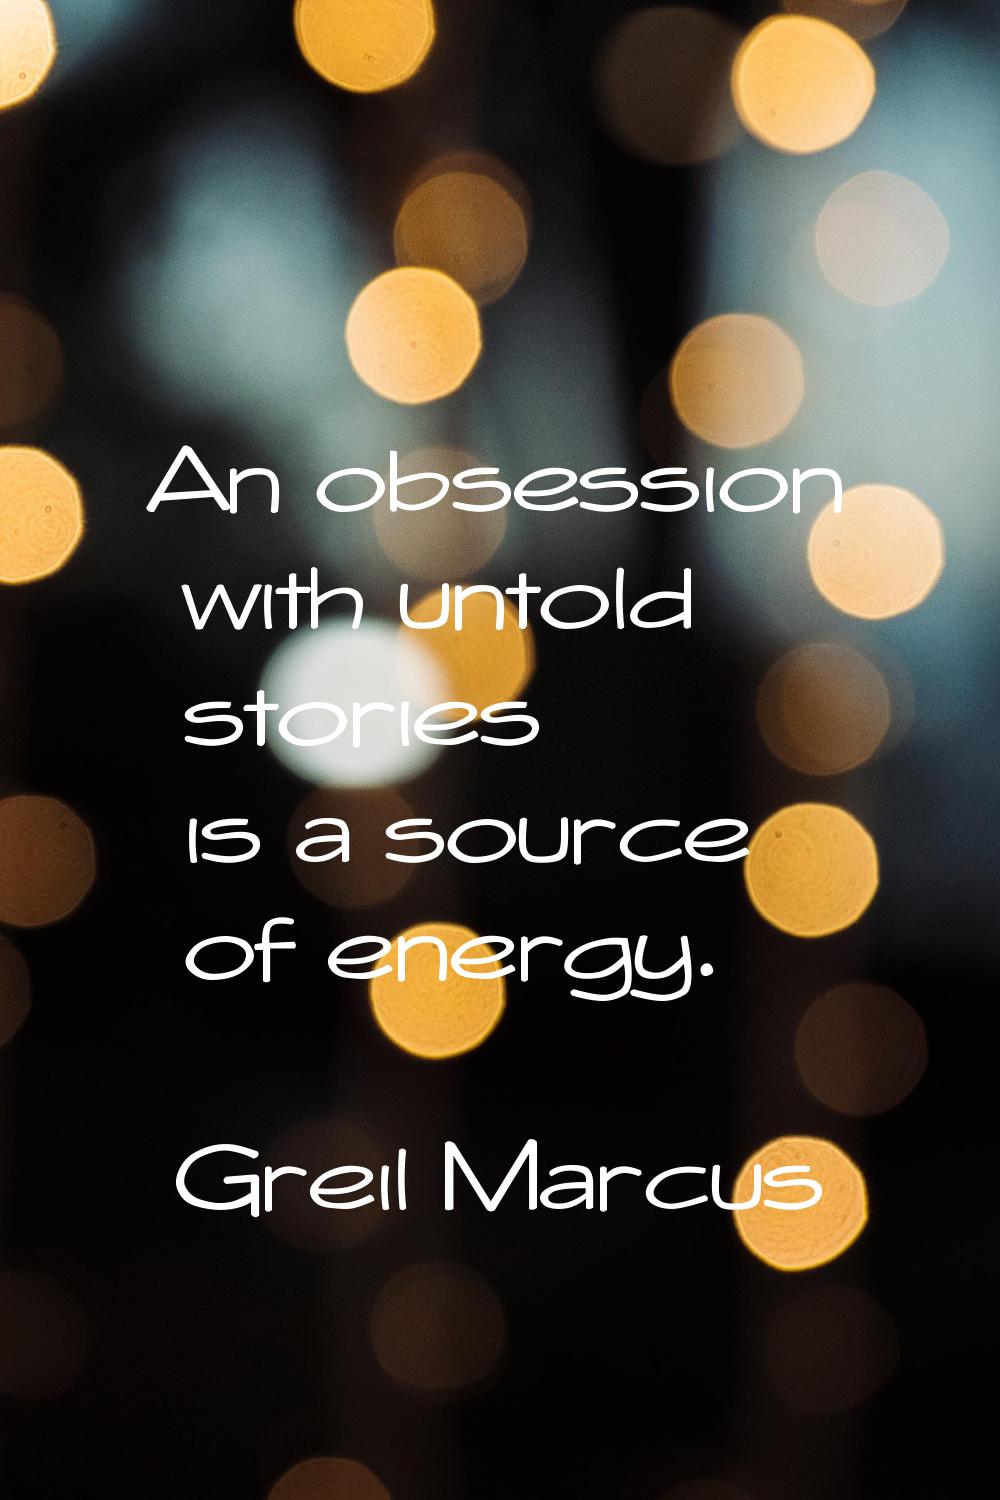 An obsession with untold stories is a source of energy.